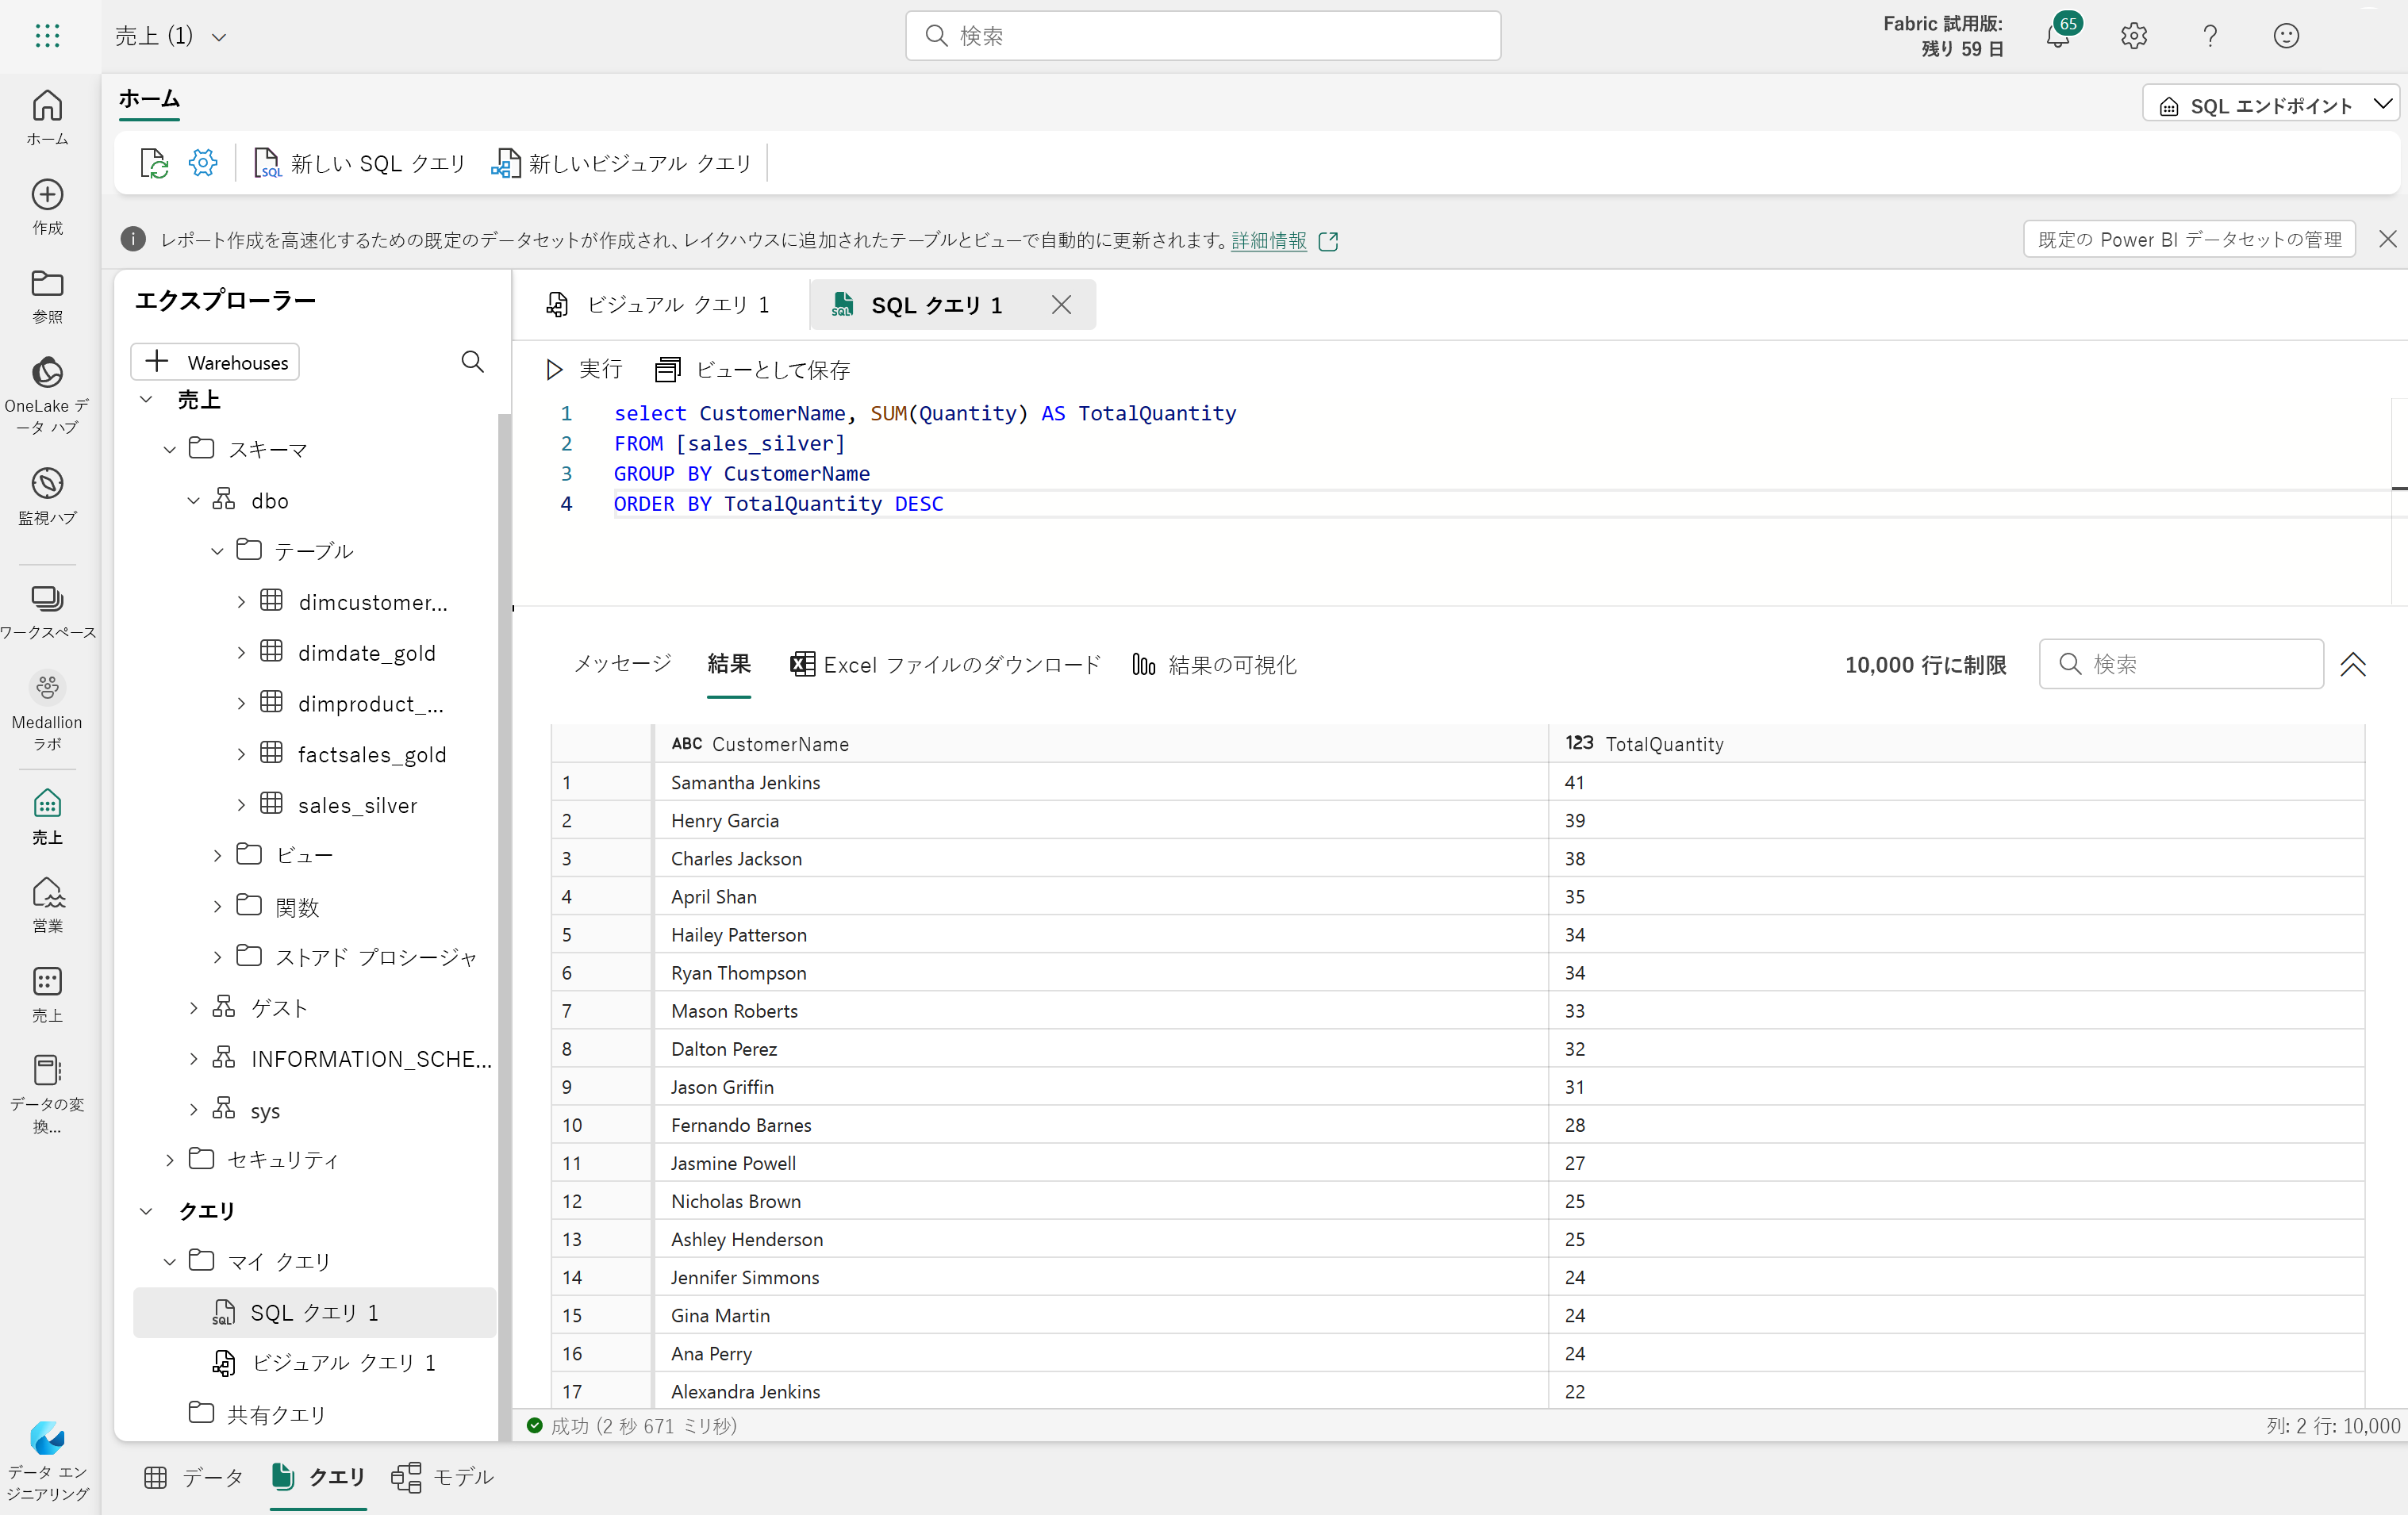 Screenshot of the SQL analytics endpoint in the Fabric user interface.